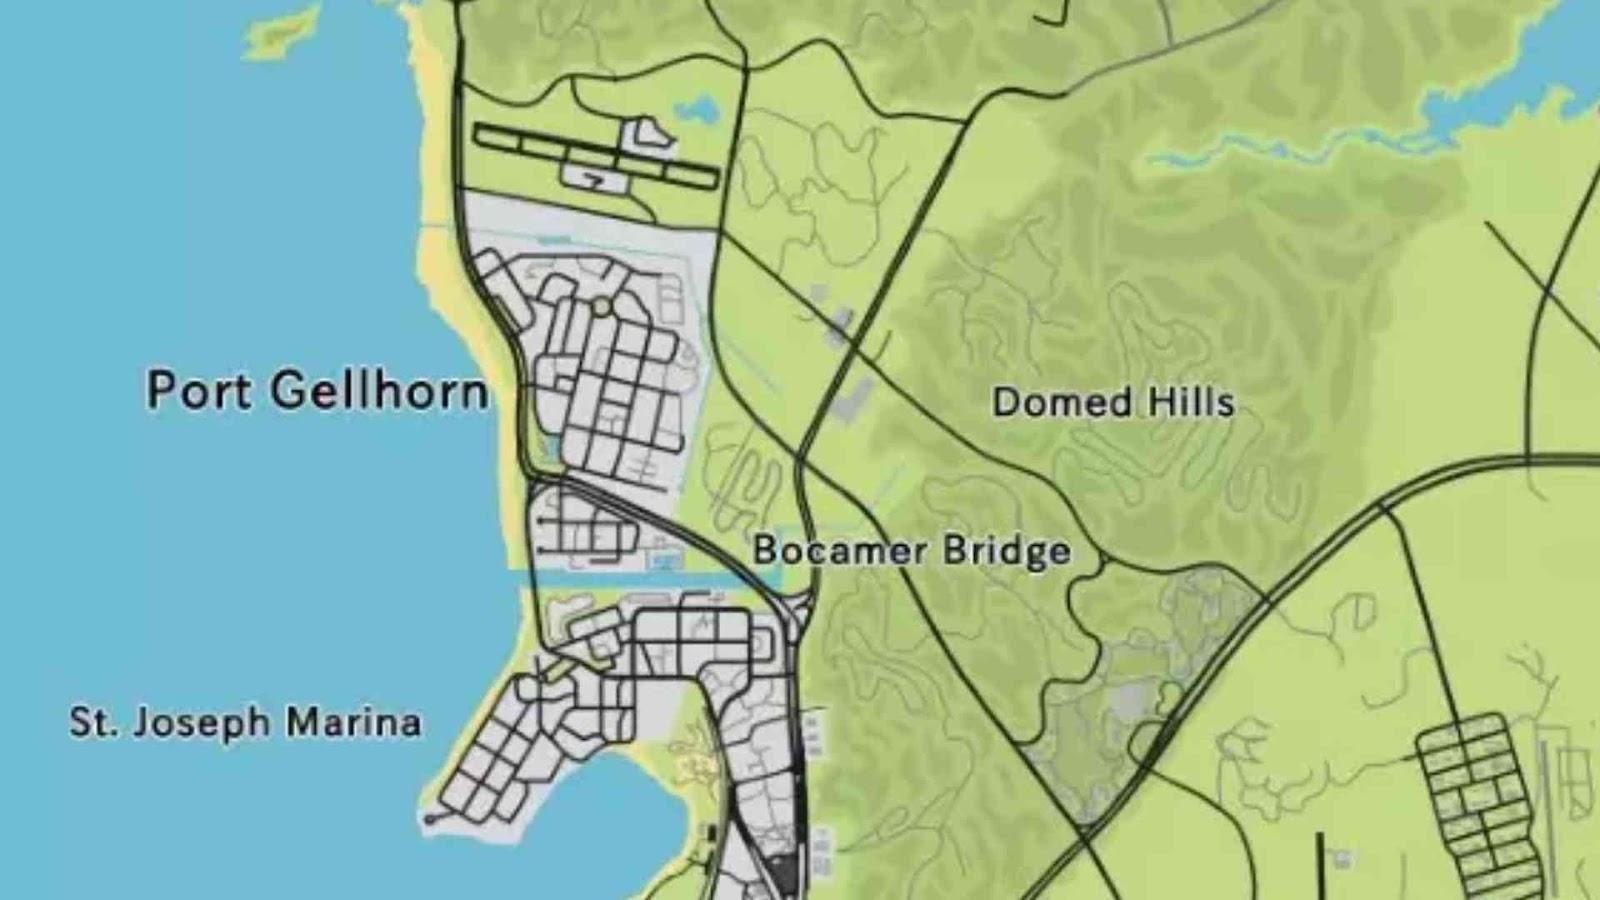 GTA 6 Map Leaks and Locations - Everything to Know So Far-Game  Guides-LDPlayer